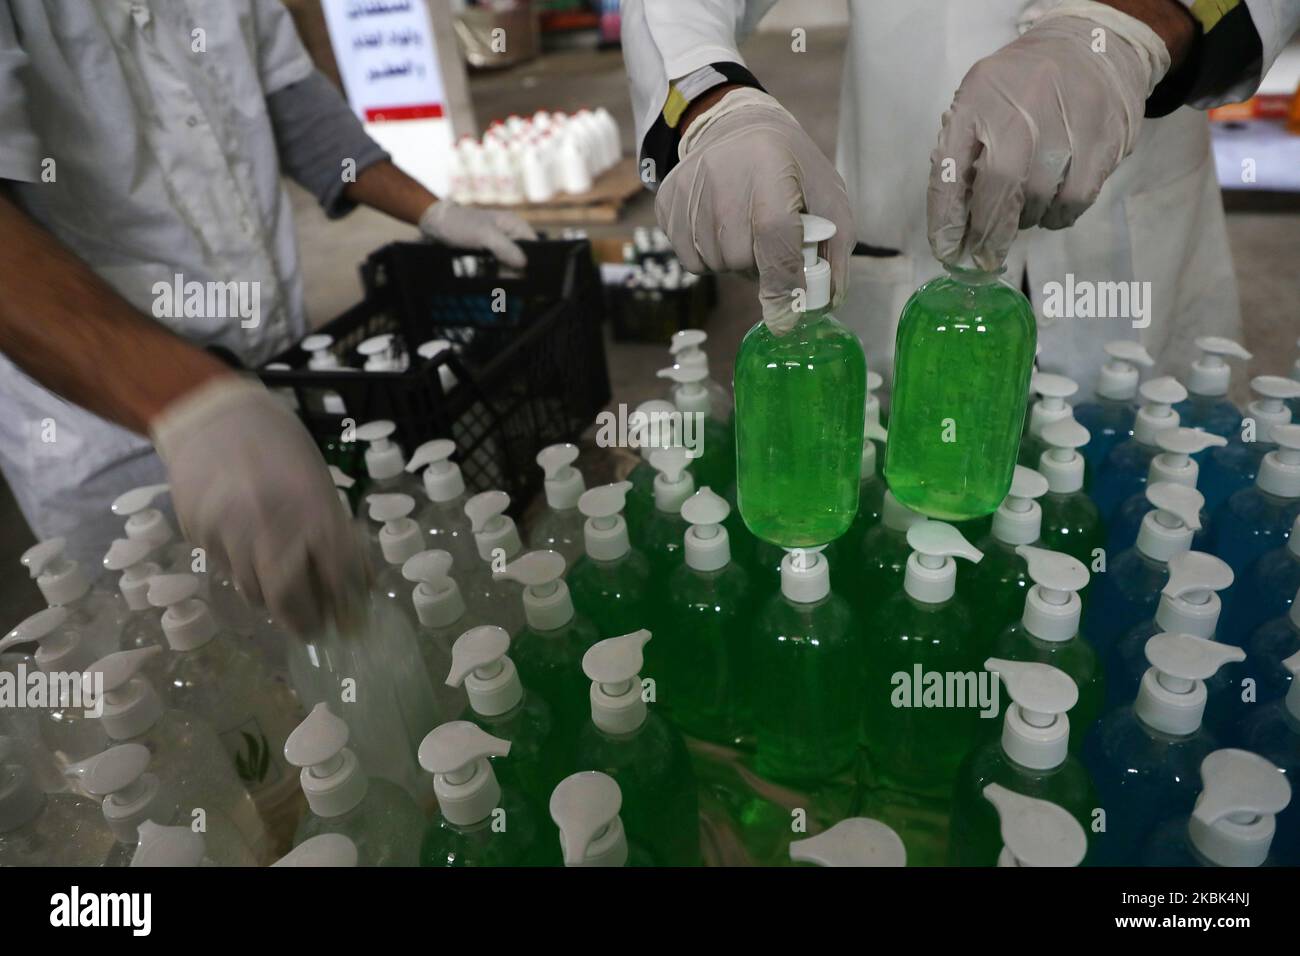 Palestinian workers work on the production line of sterilizing gel at a cleaning materials factory in the southern Gaza Strip city of Rafah, March 17, 2020. Gaza authorities declared a new set of precautionary measures amid concerns about the spread of the novel coronavirus in the coastal enclave. (Photo by Majdi Fathi/NurPhoto) Stock Photo